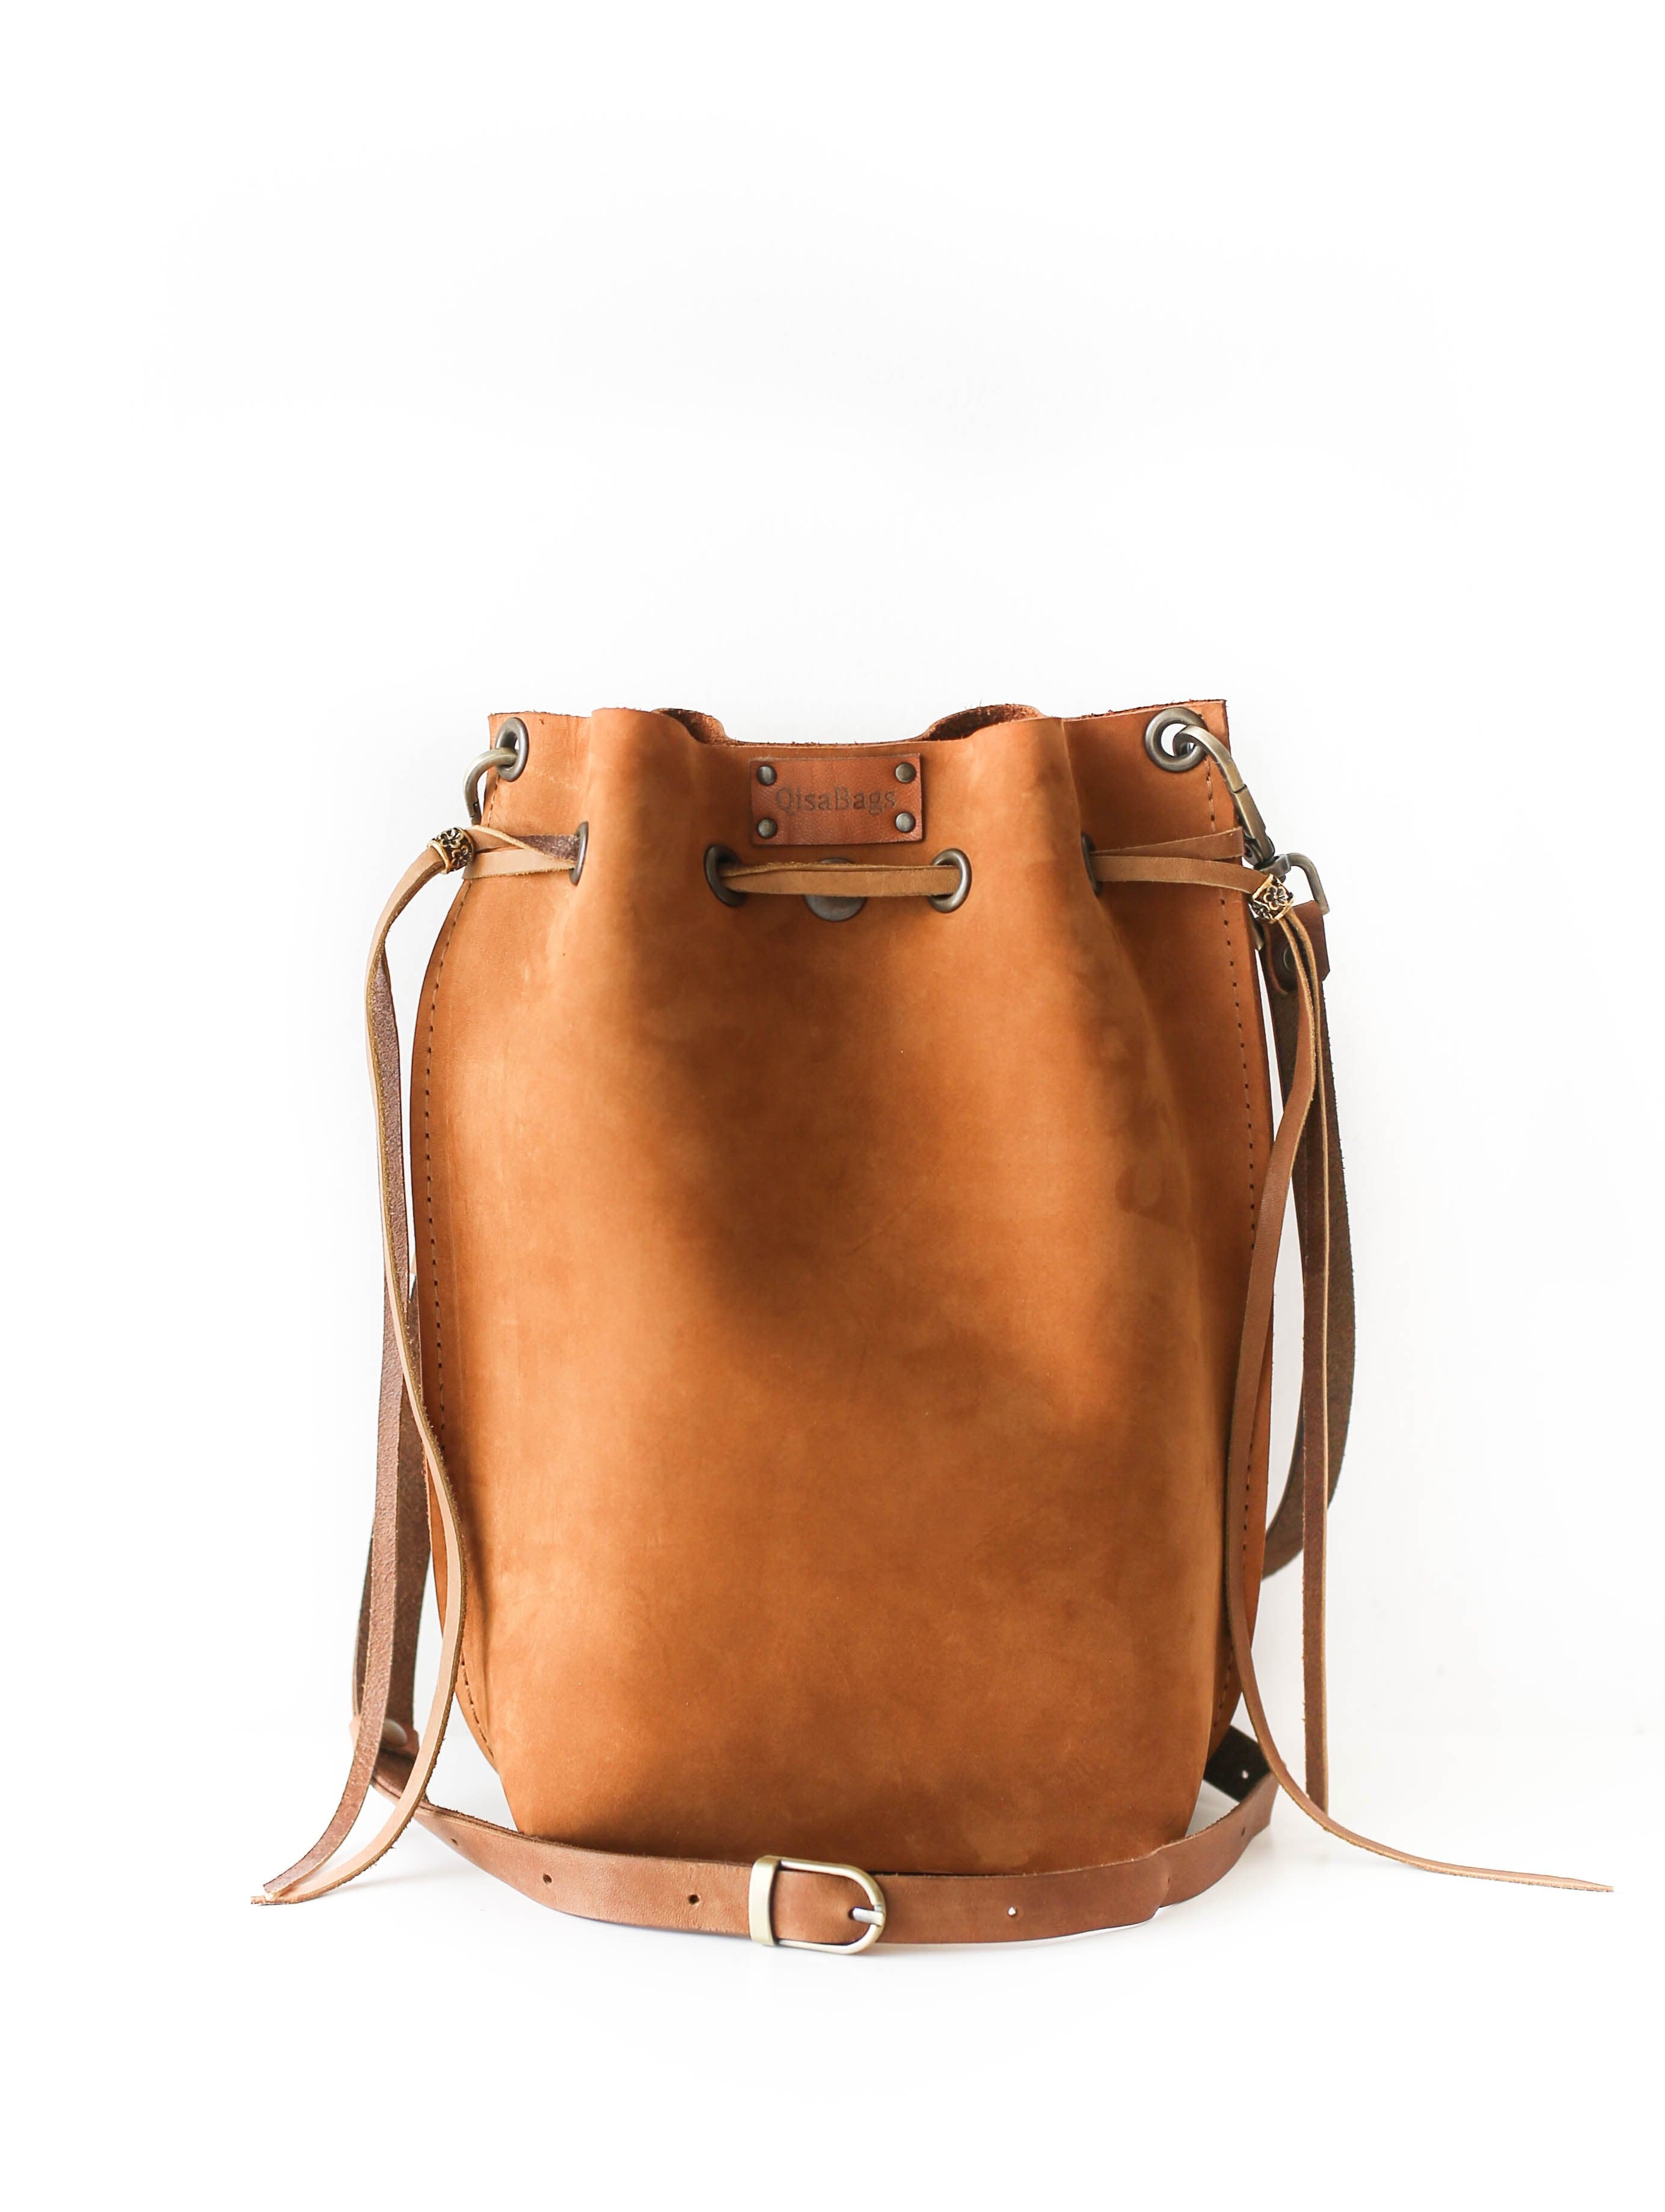 Drawstring Bucket Bag | Brown Leather Purse - Qisabags Leather Strap